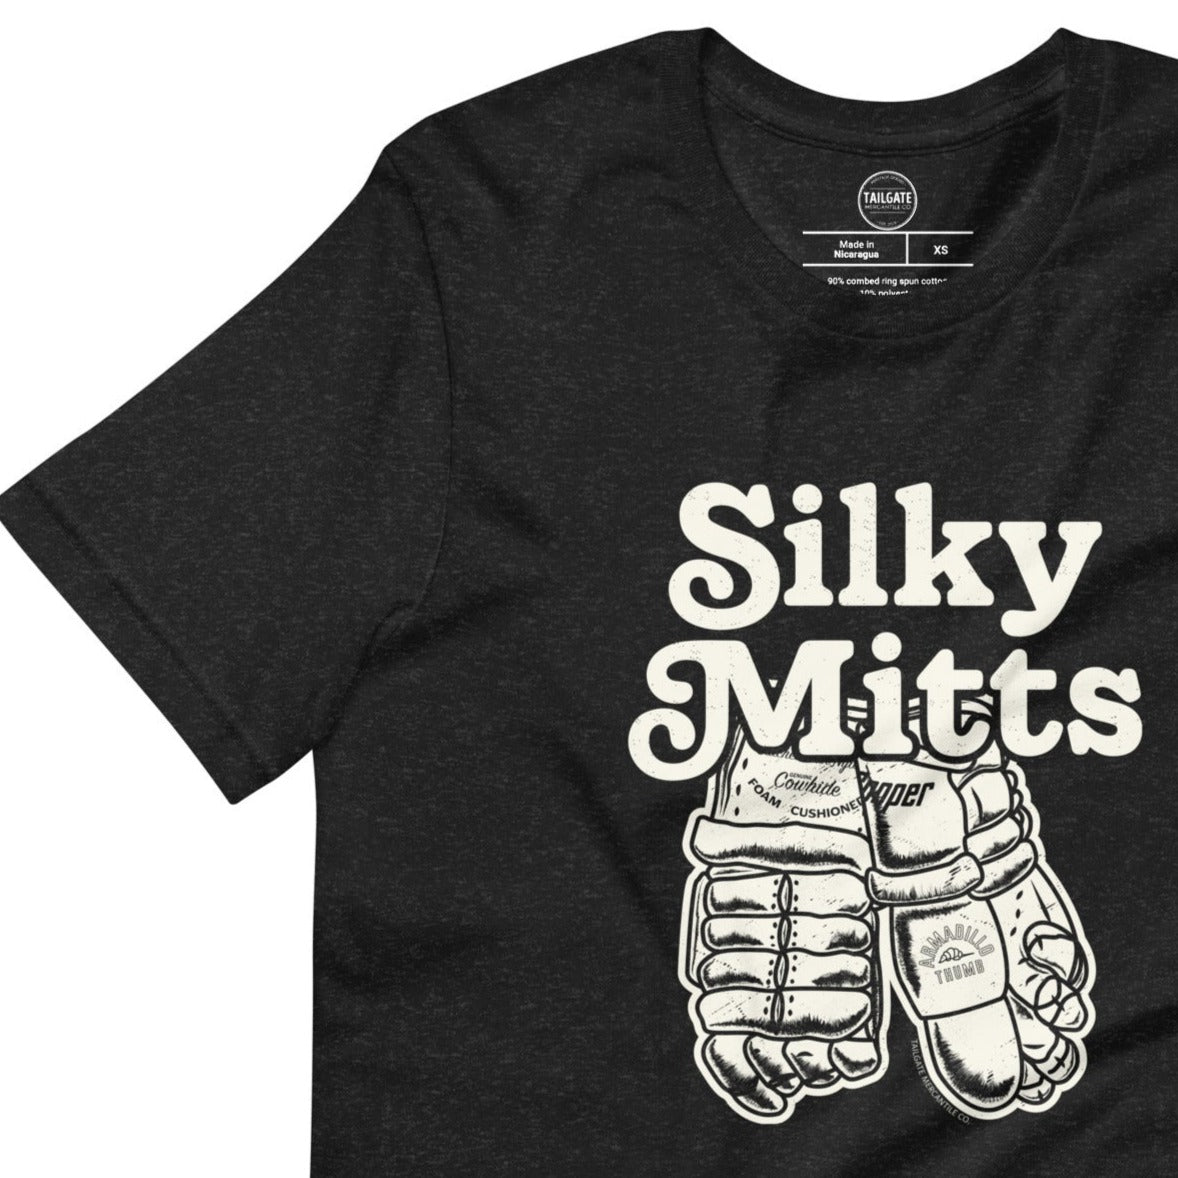 **ONLINE EXCLUSIVE** TMCo Silky Mitts Unisex T-shirt